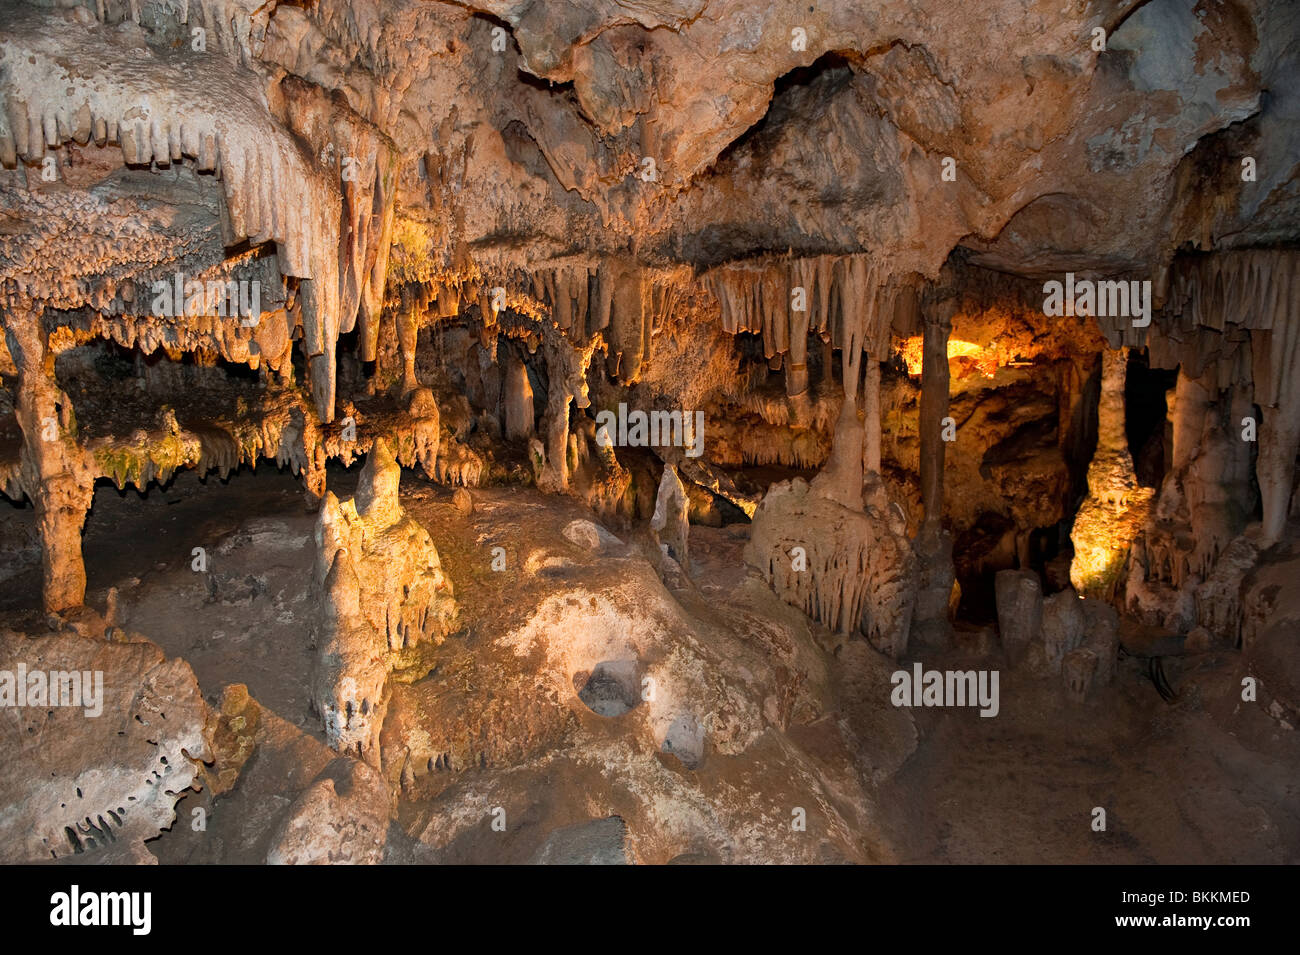 The Fairyland Chamber in the Cango Caves, Oudtshoorn, Western Cape, South Africa Stock Photo